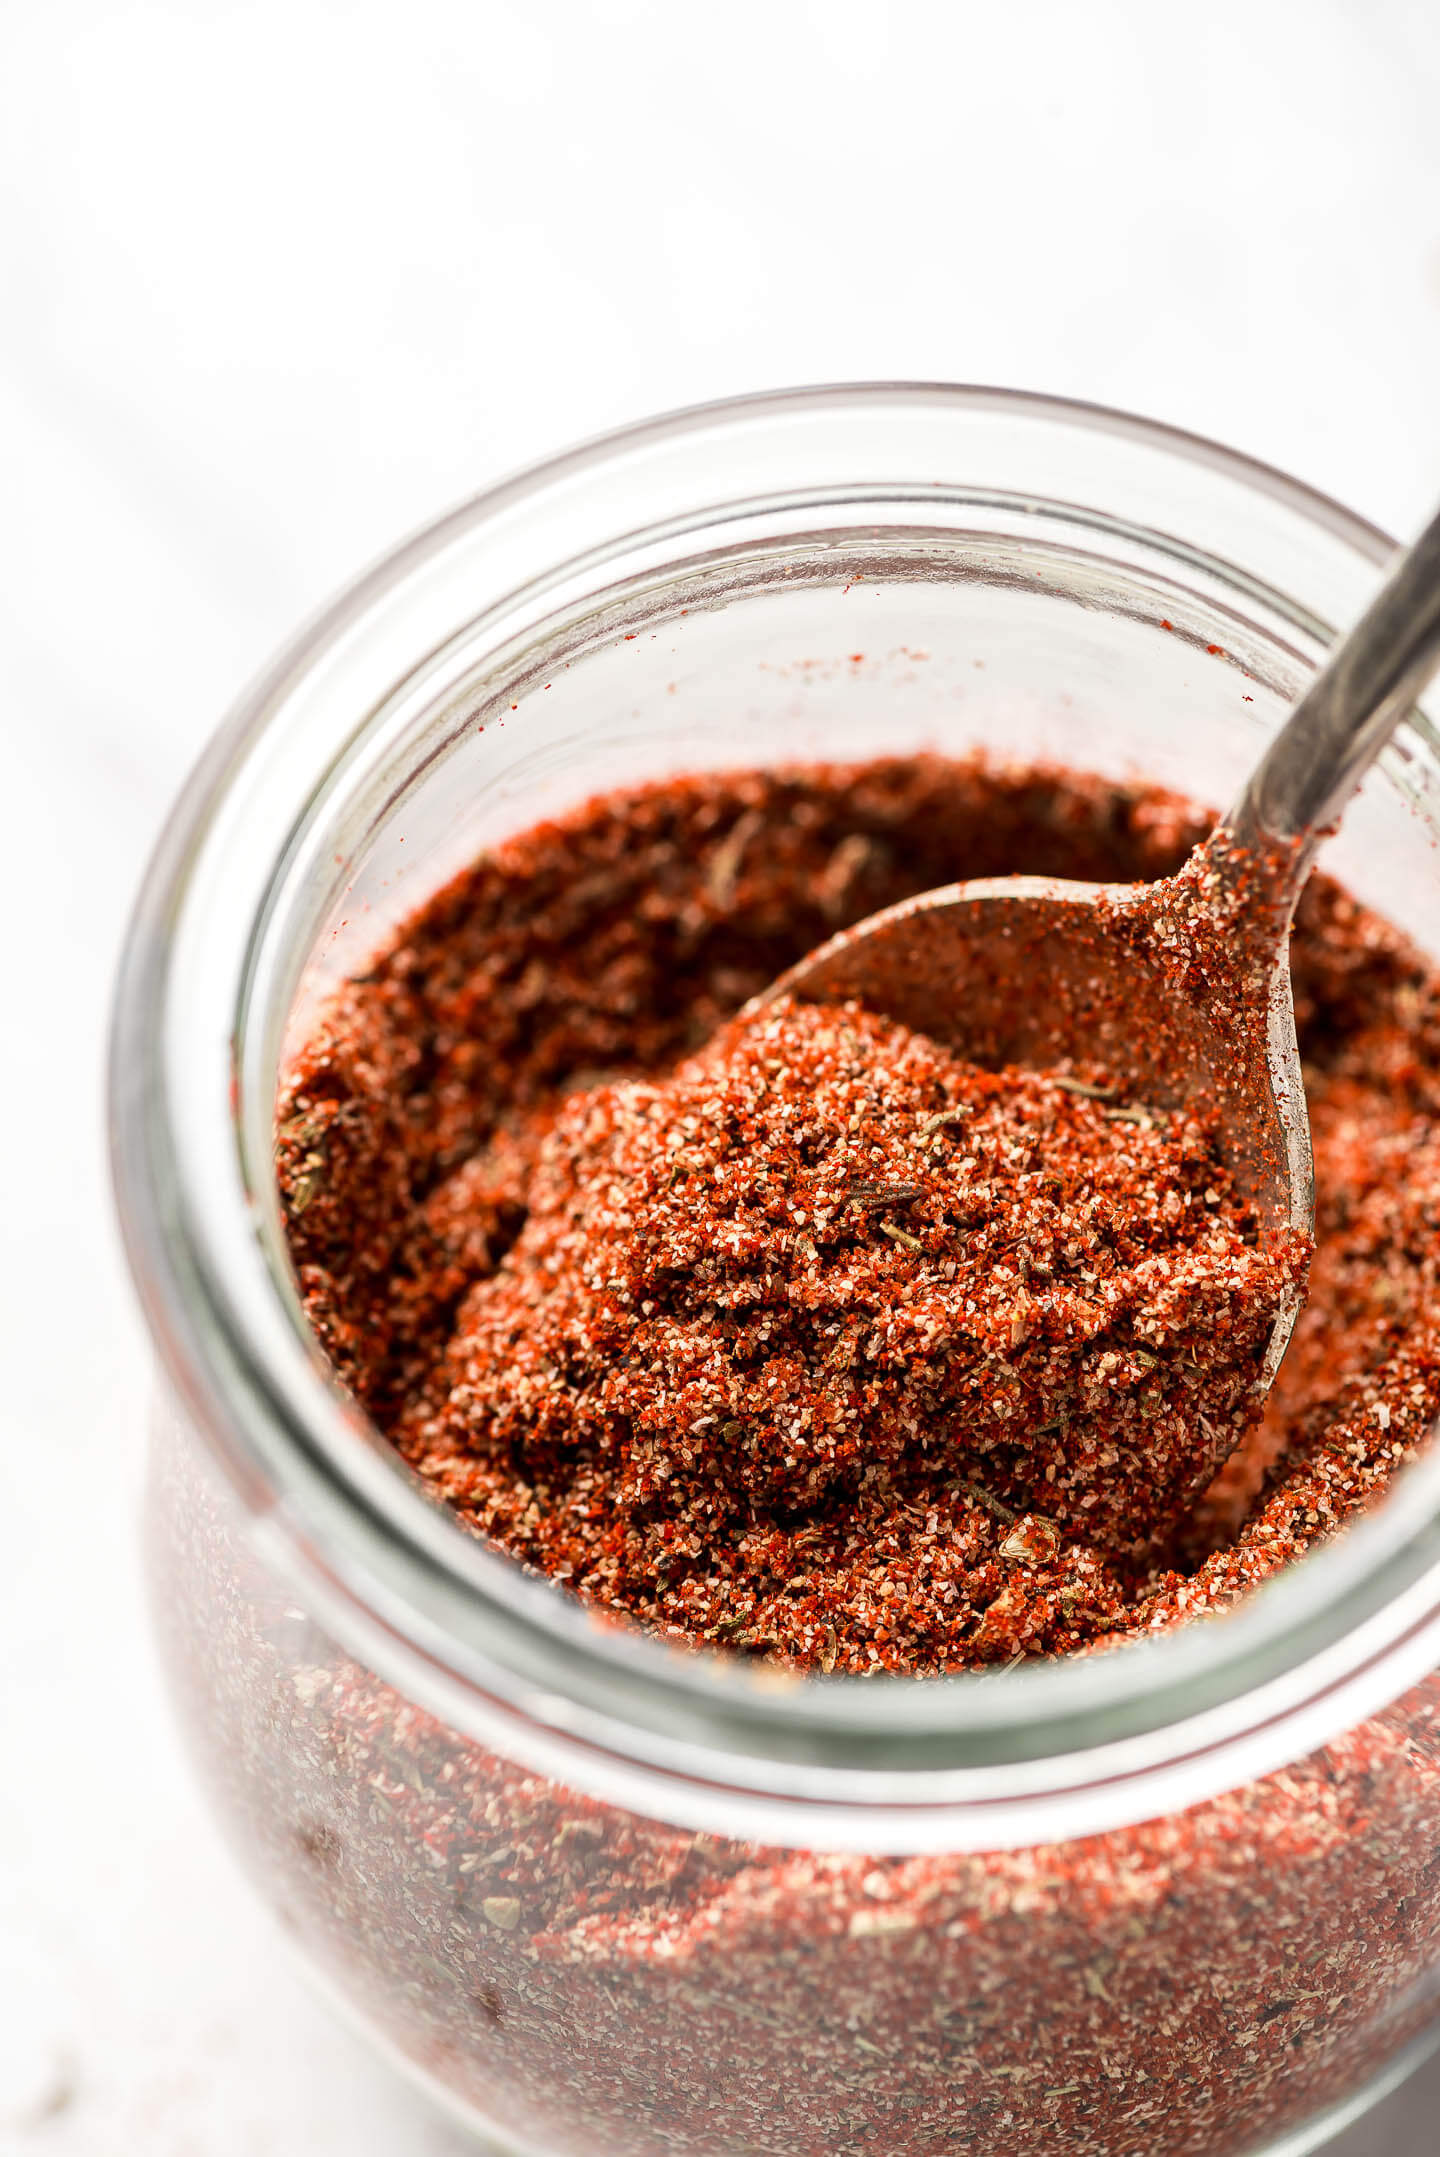 A close up shot of a spoon lifting out Homemade Cajun Seasoning from a jar.